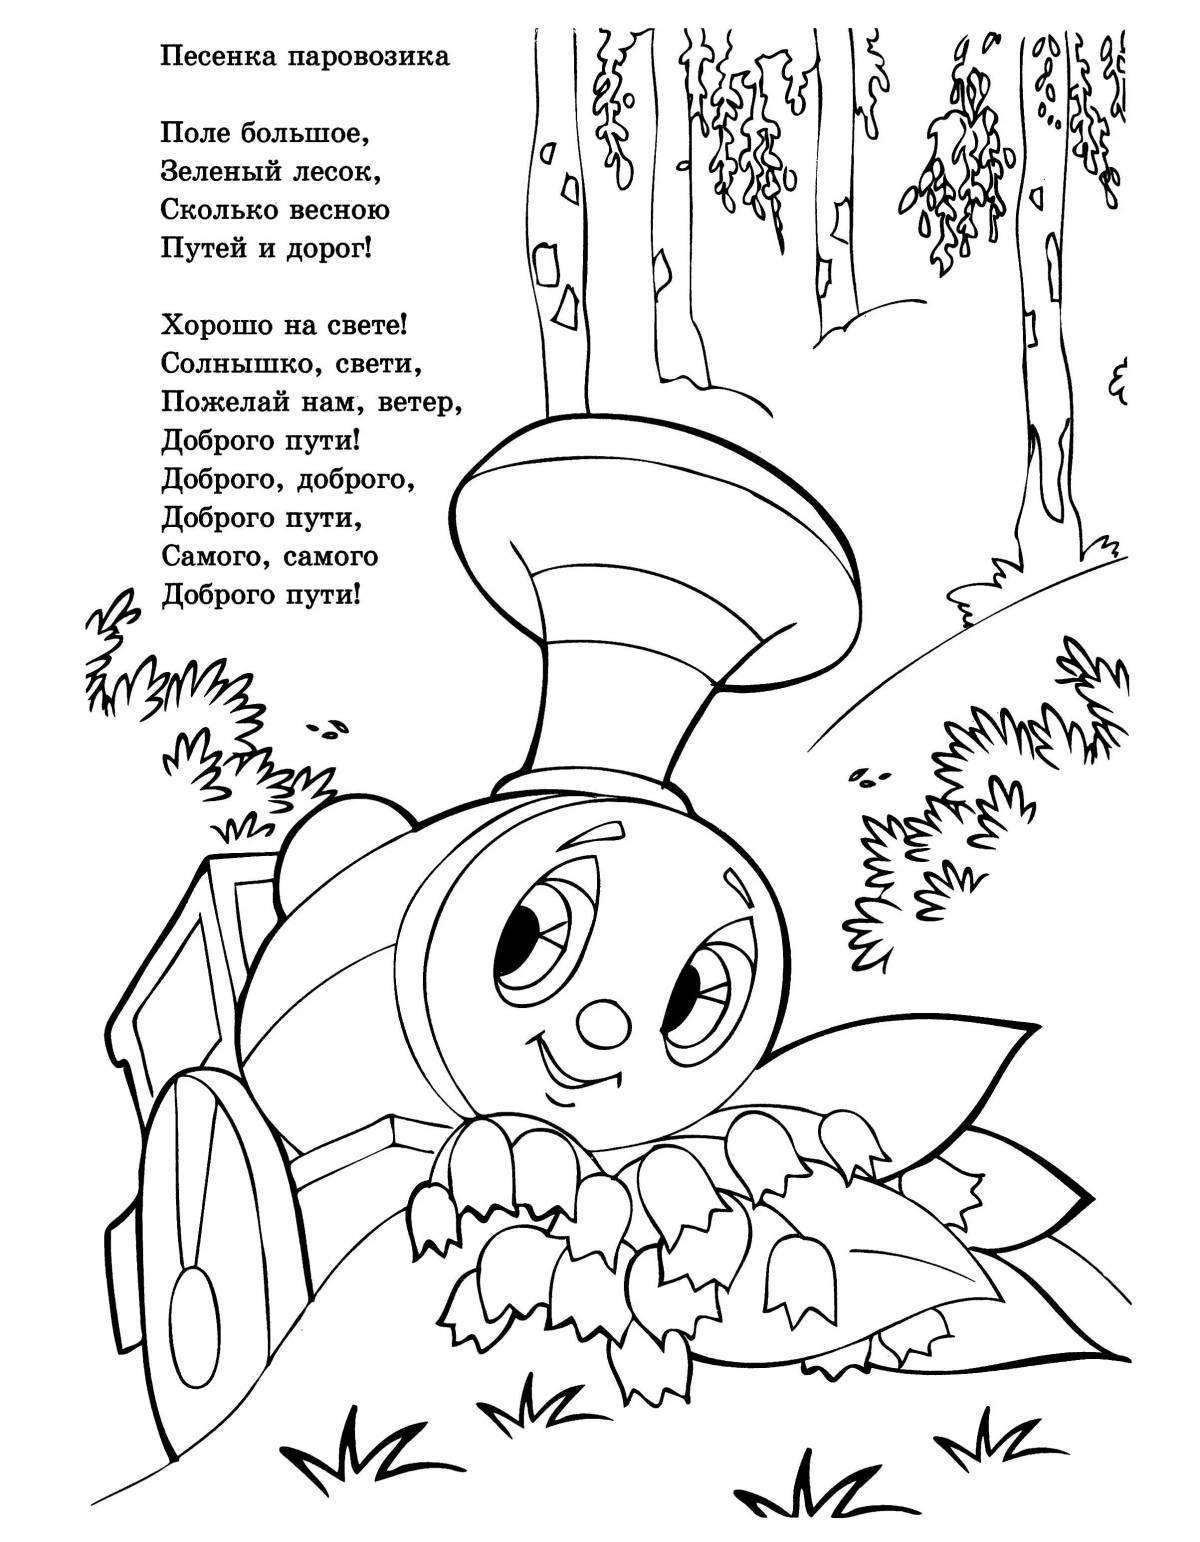 Amazing Soviet coloring book for kids